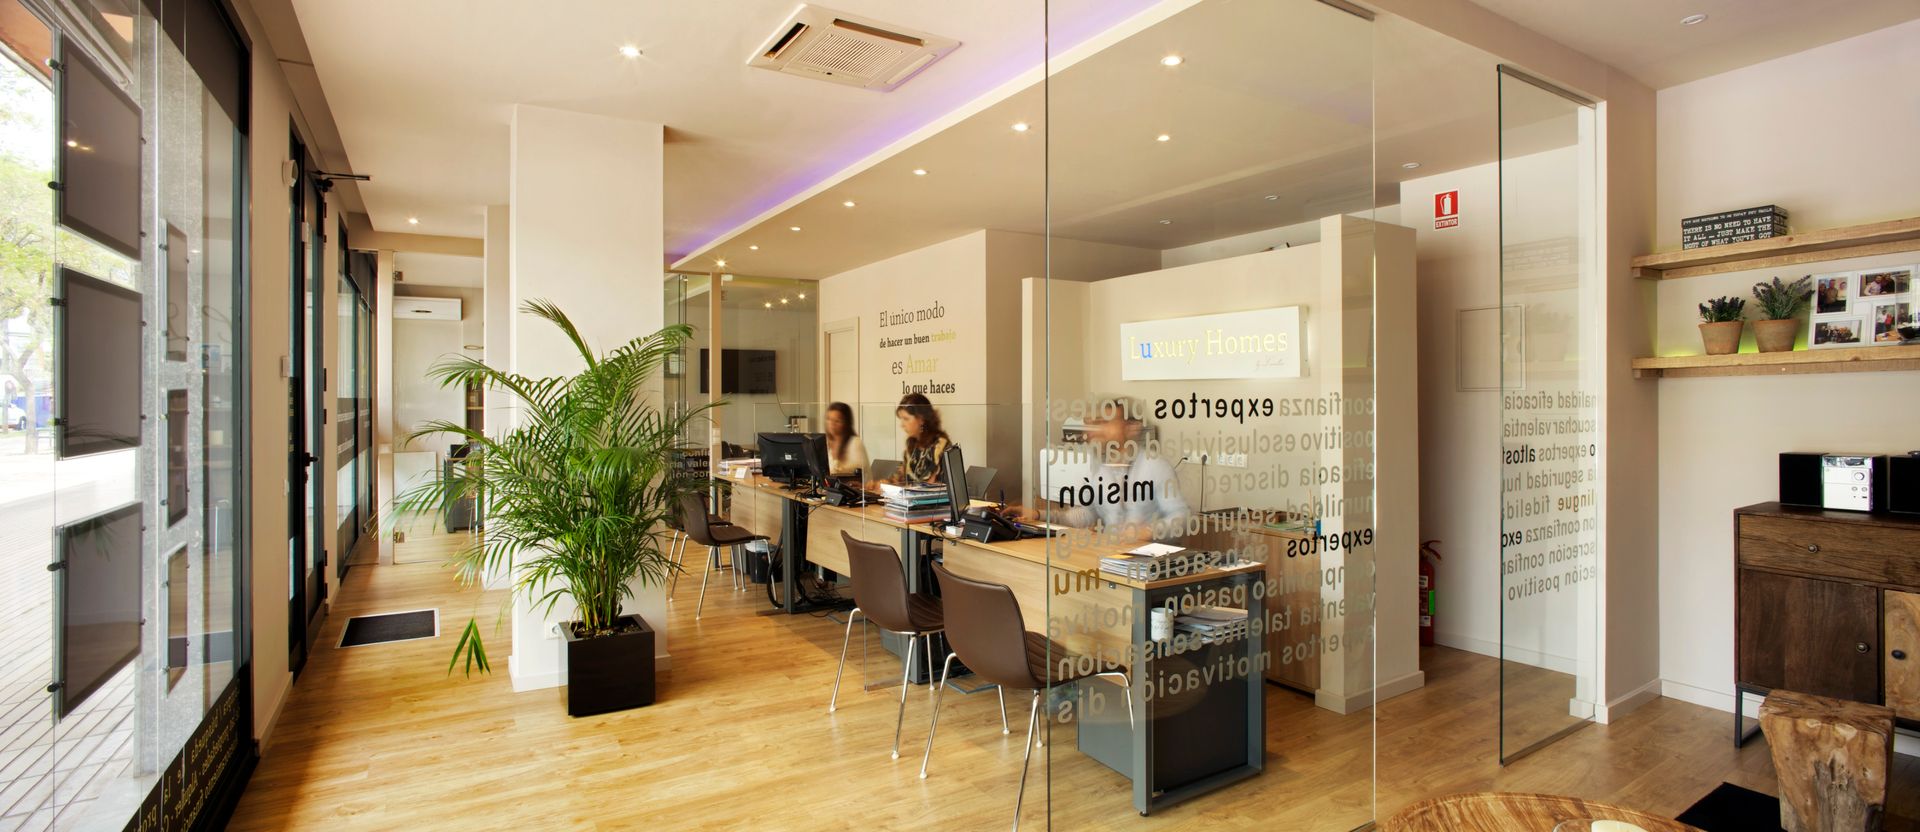 Luna LLar Luxury Homes, costa+dos costa+dos Commercial spaces Offices & stores